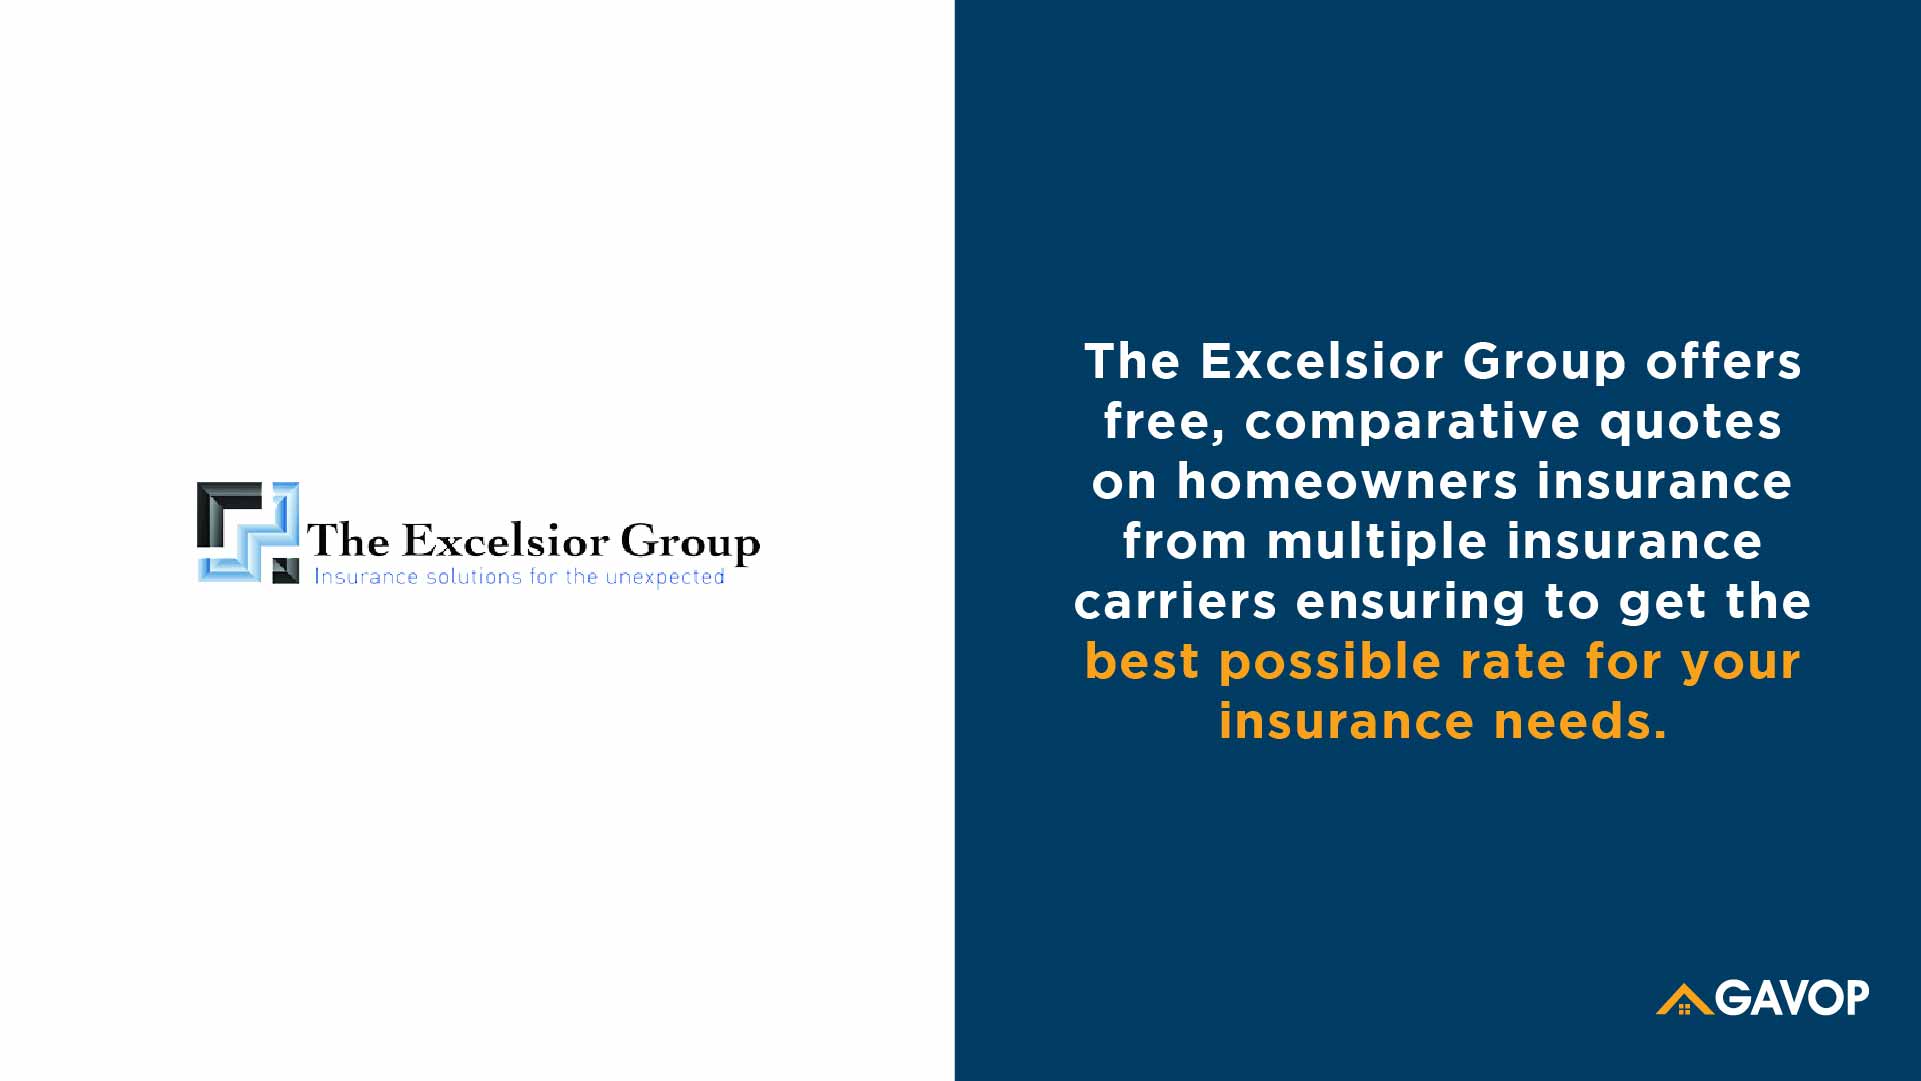 The Excelsior Group